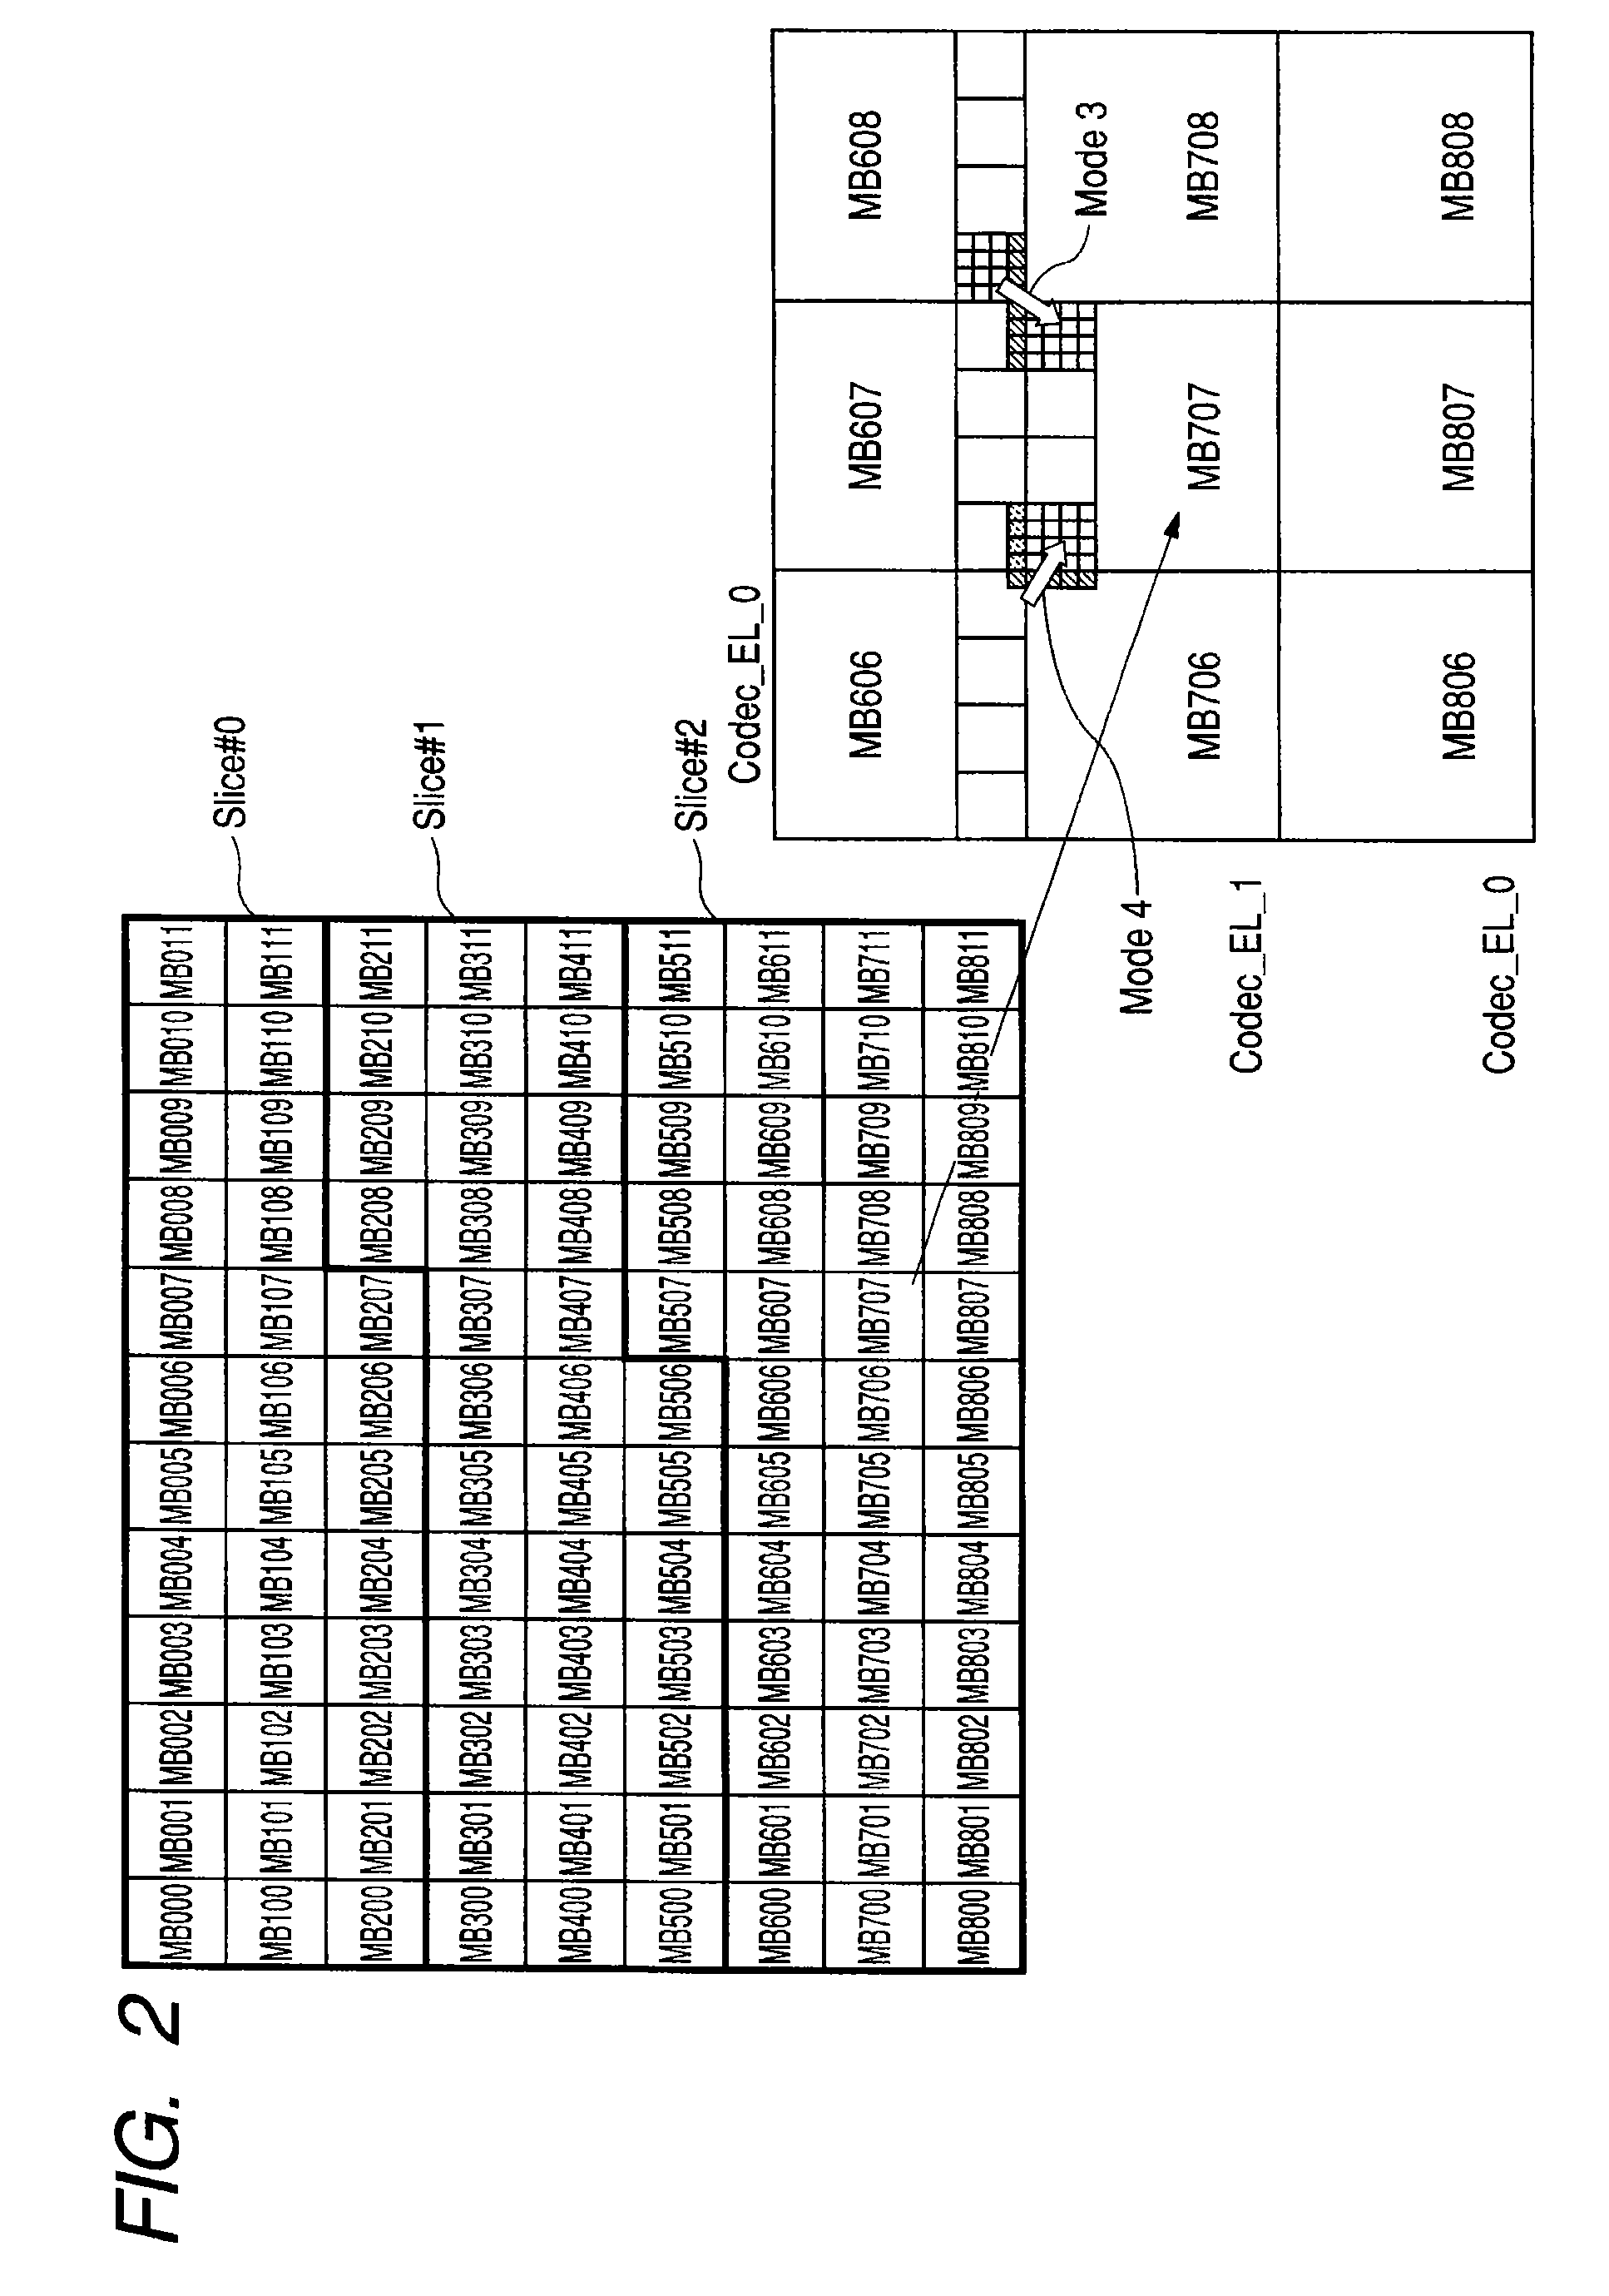 Parallel processing circuit for intra-frame prediction